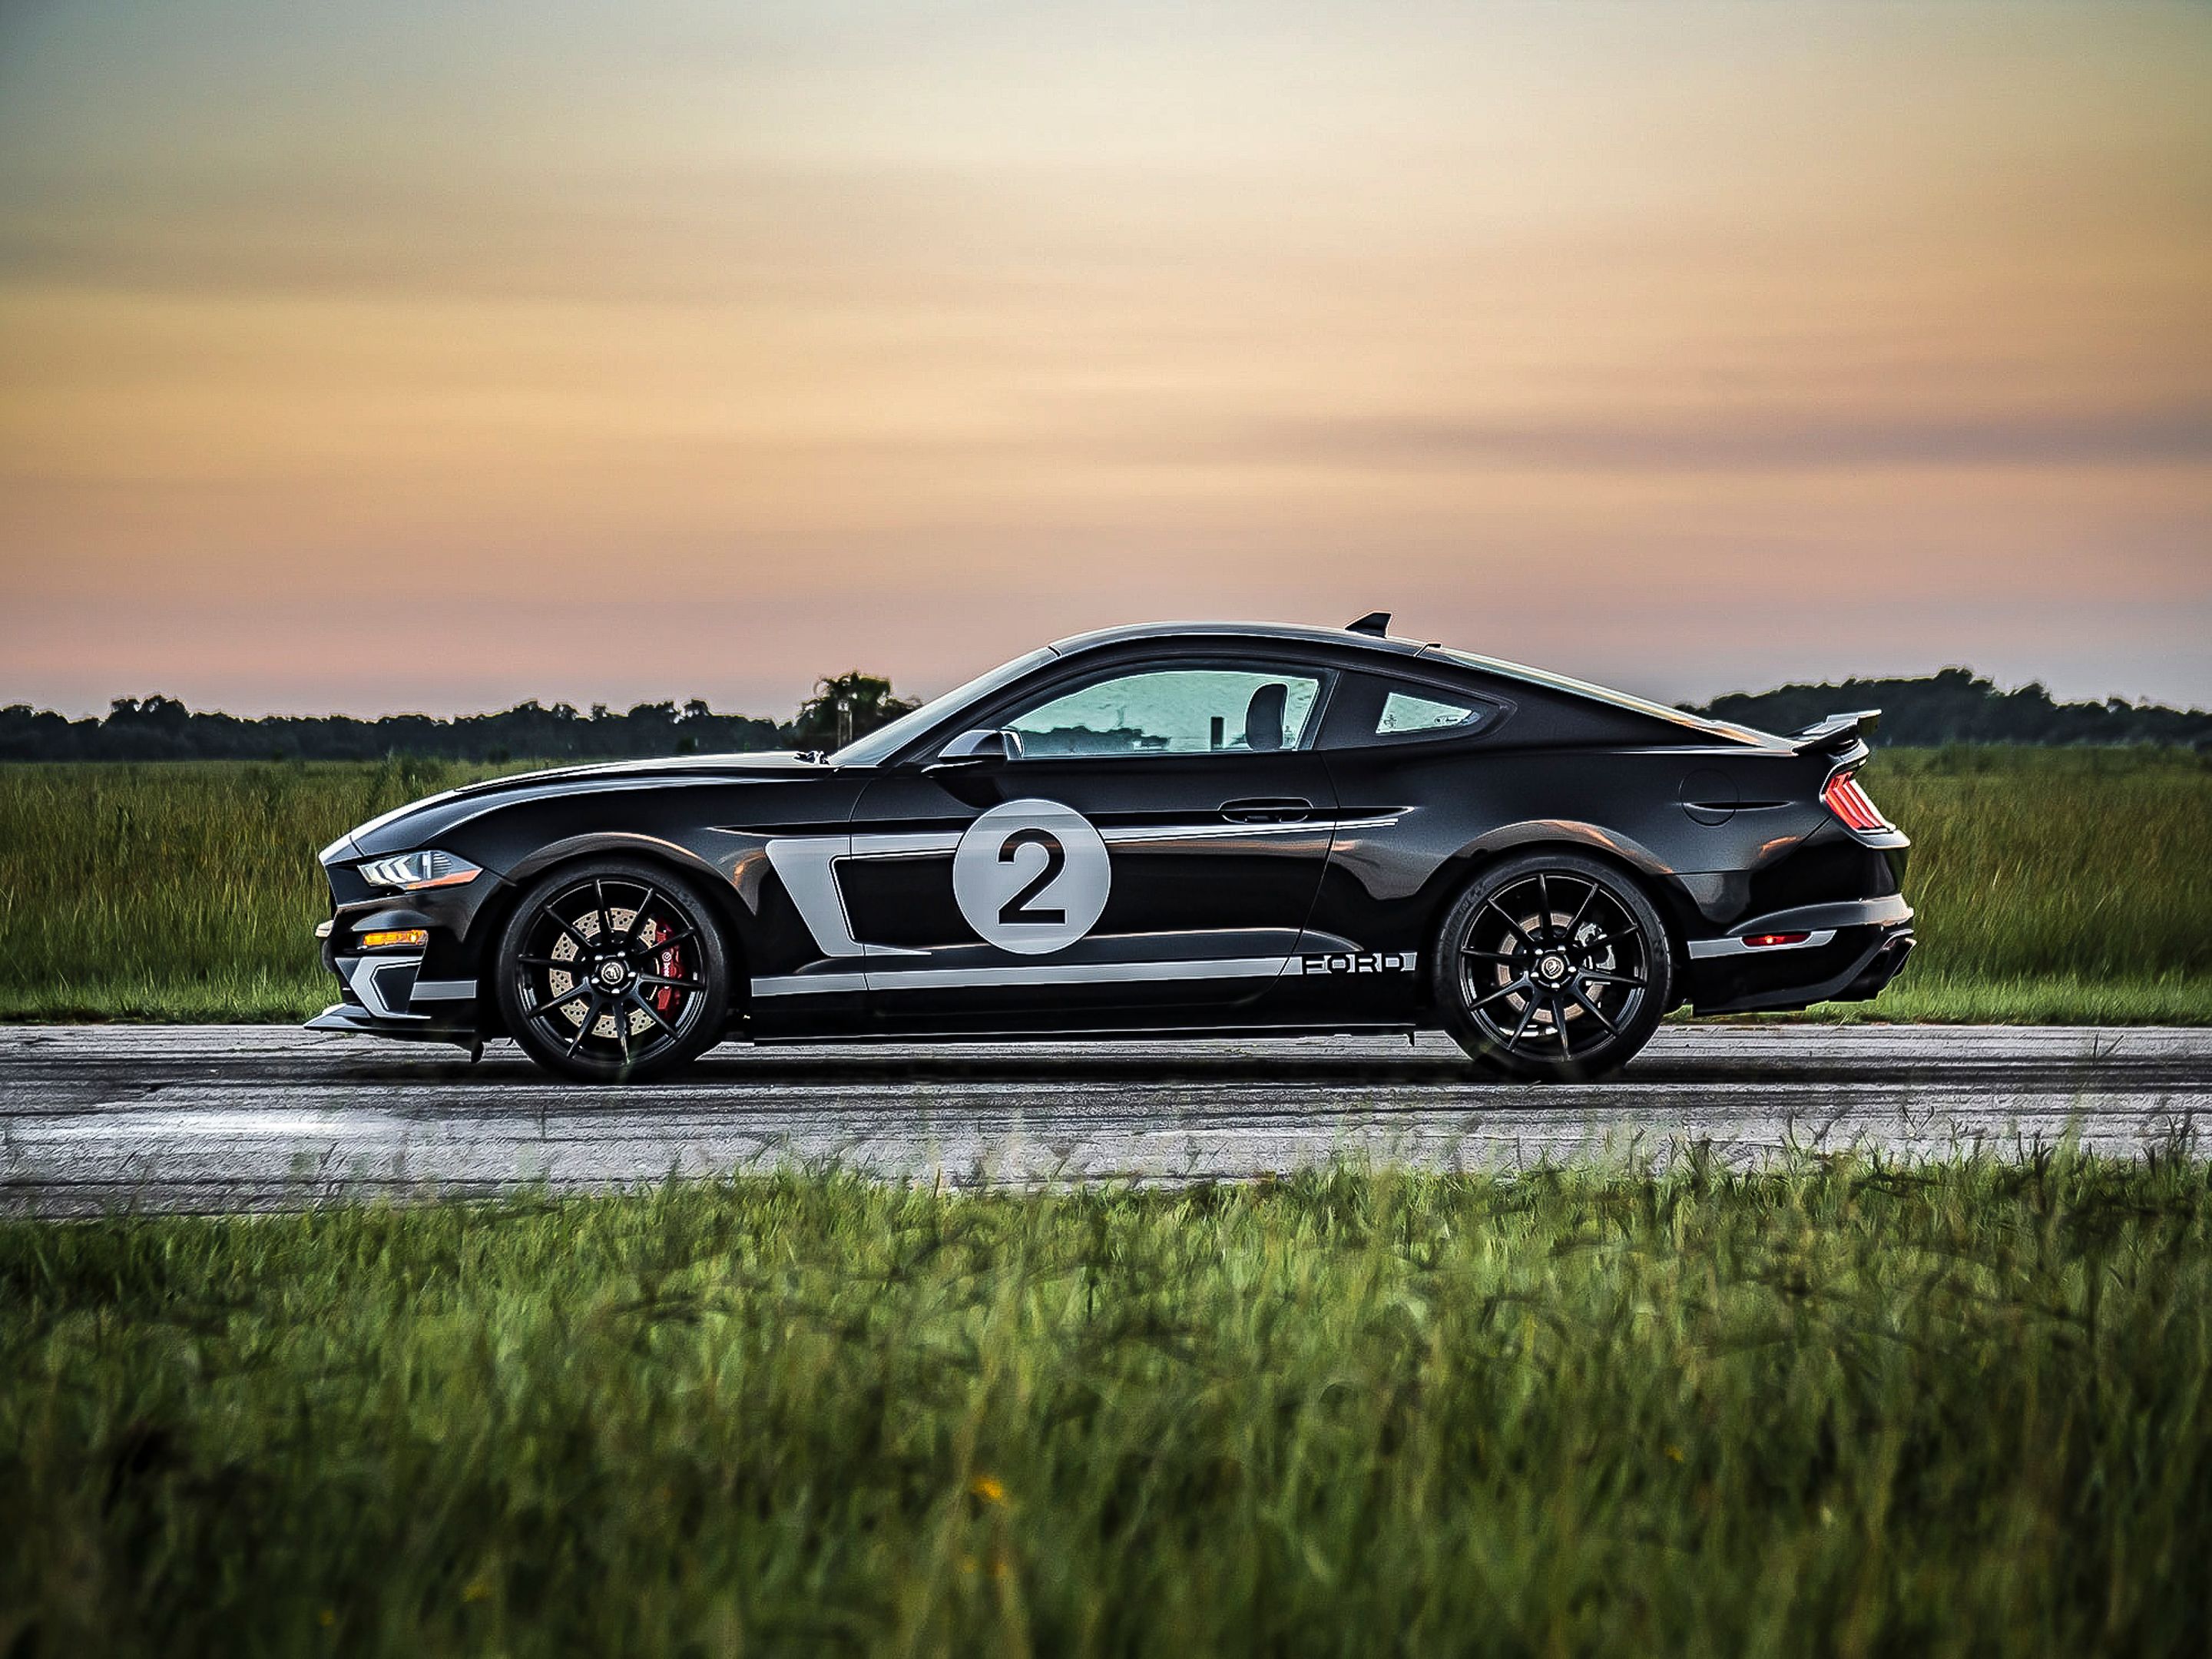 2021 Ford Mustang Legend Edition by Hennessey